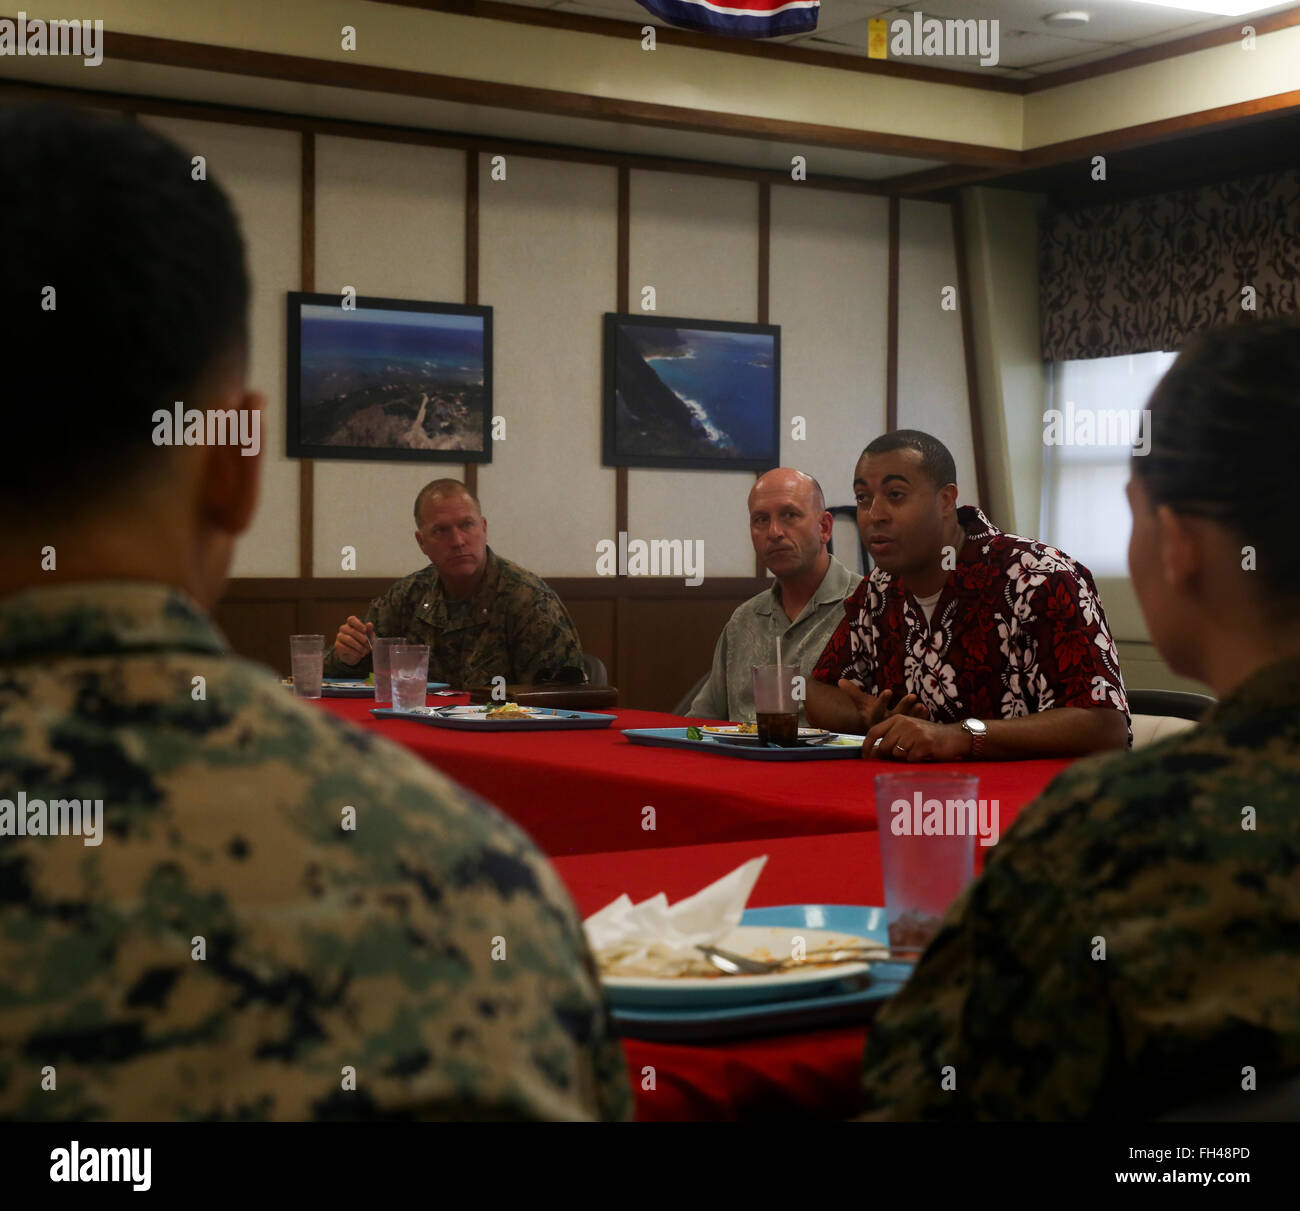 Franklin Parker, the assistant secretary of the Navy (manpower and reserved affairs), speaks to Marines and Sailors following lunch at Anderson Hall aboard Marine Corps Base Hawaii, Feb. 22, 2016. Parker, a Joliet, Ill., native, had lunch with Marines and Sailors in hopes to learn more about them. “I came here to know more about them and what they do,” Parker said. “I also wanted to show my face, since I’m new, and answer any questions.” Stock Photo